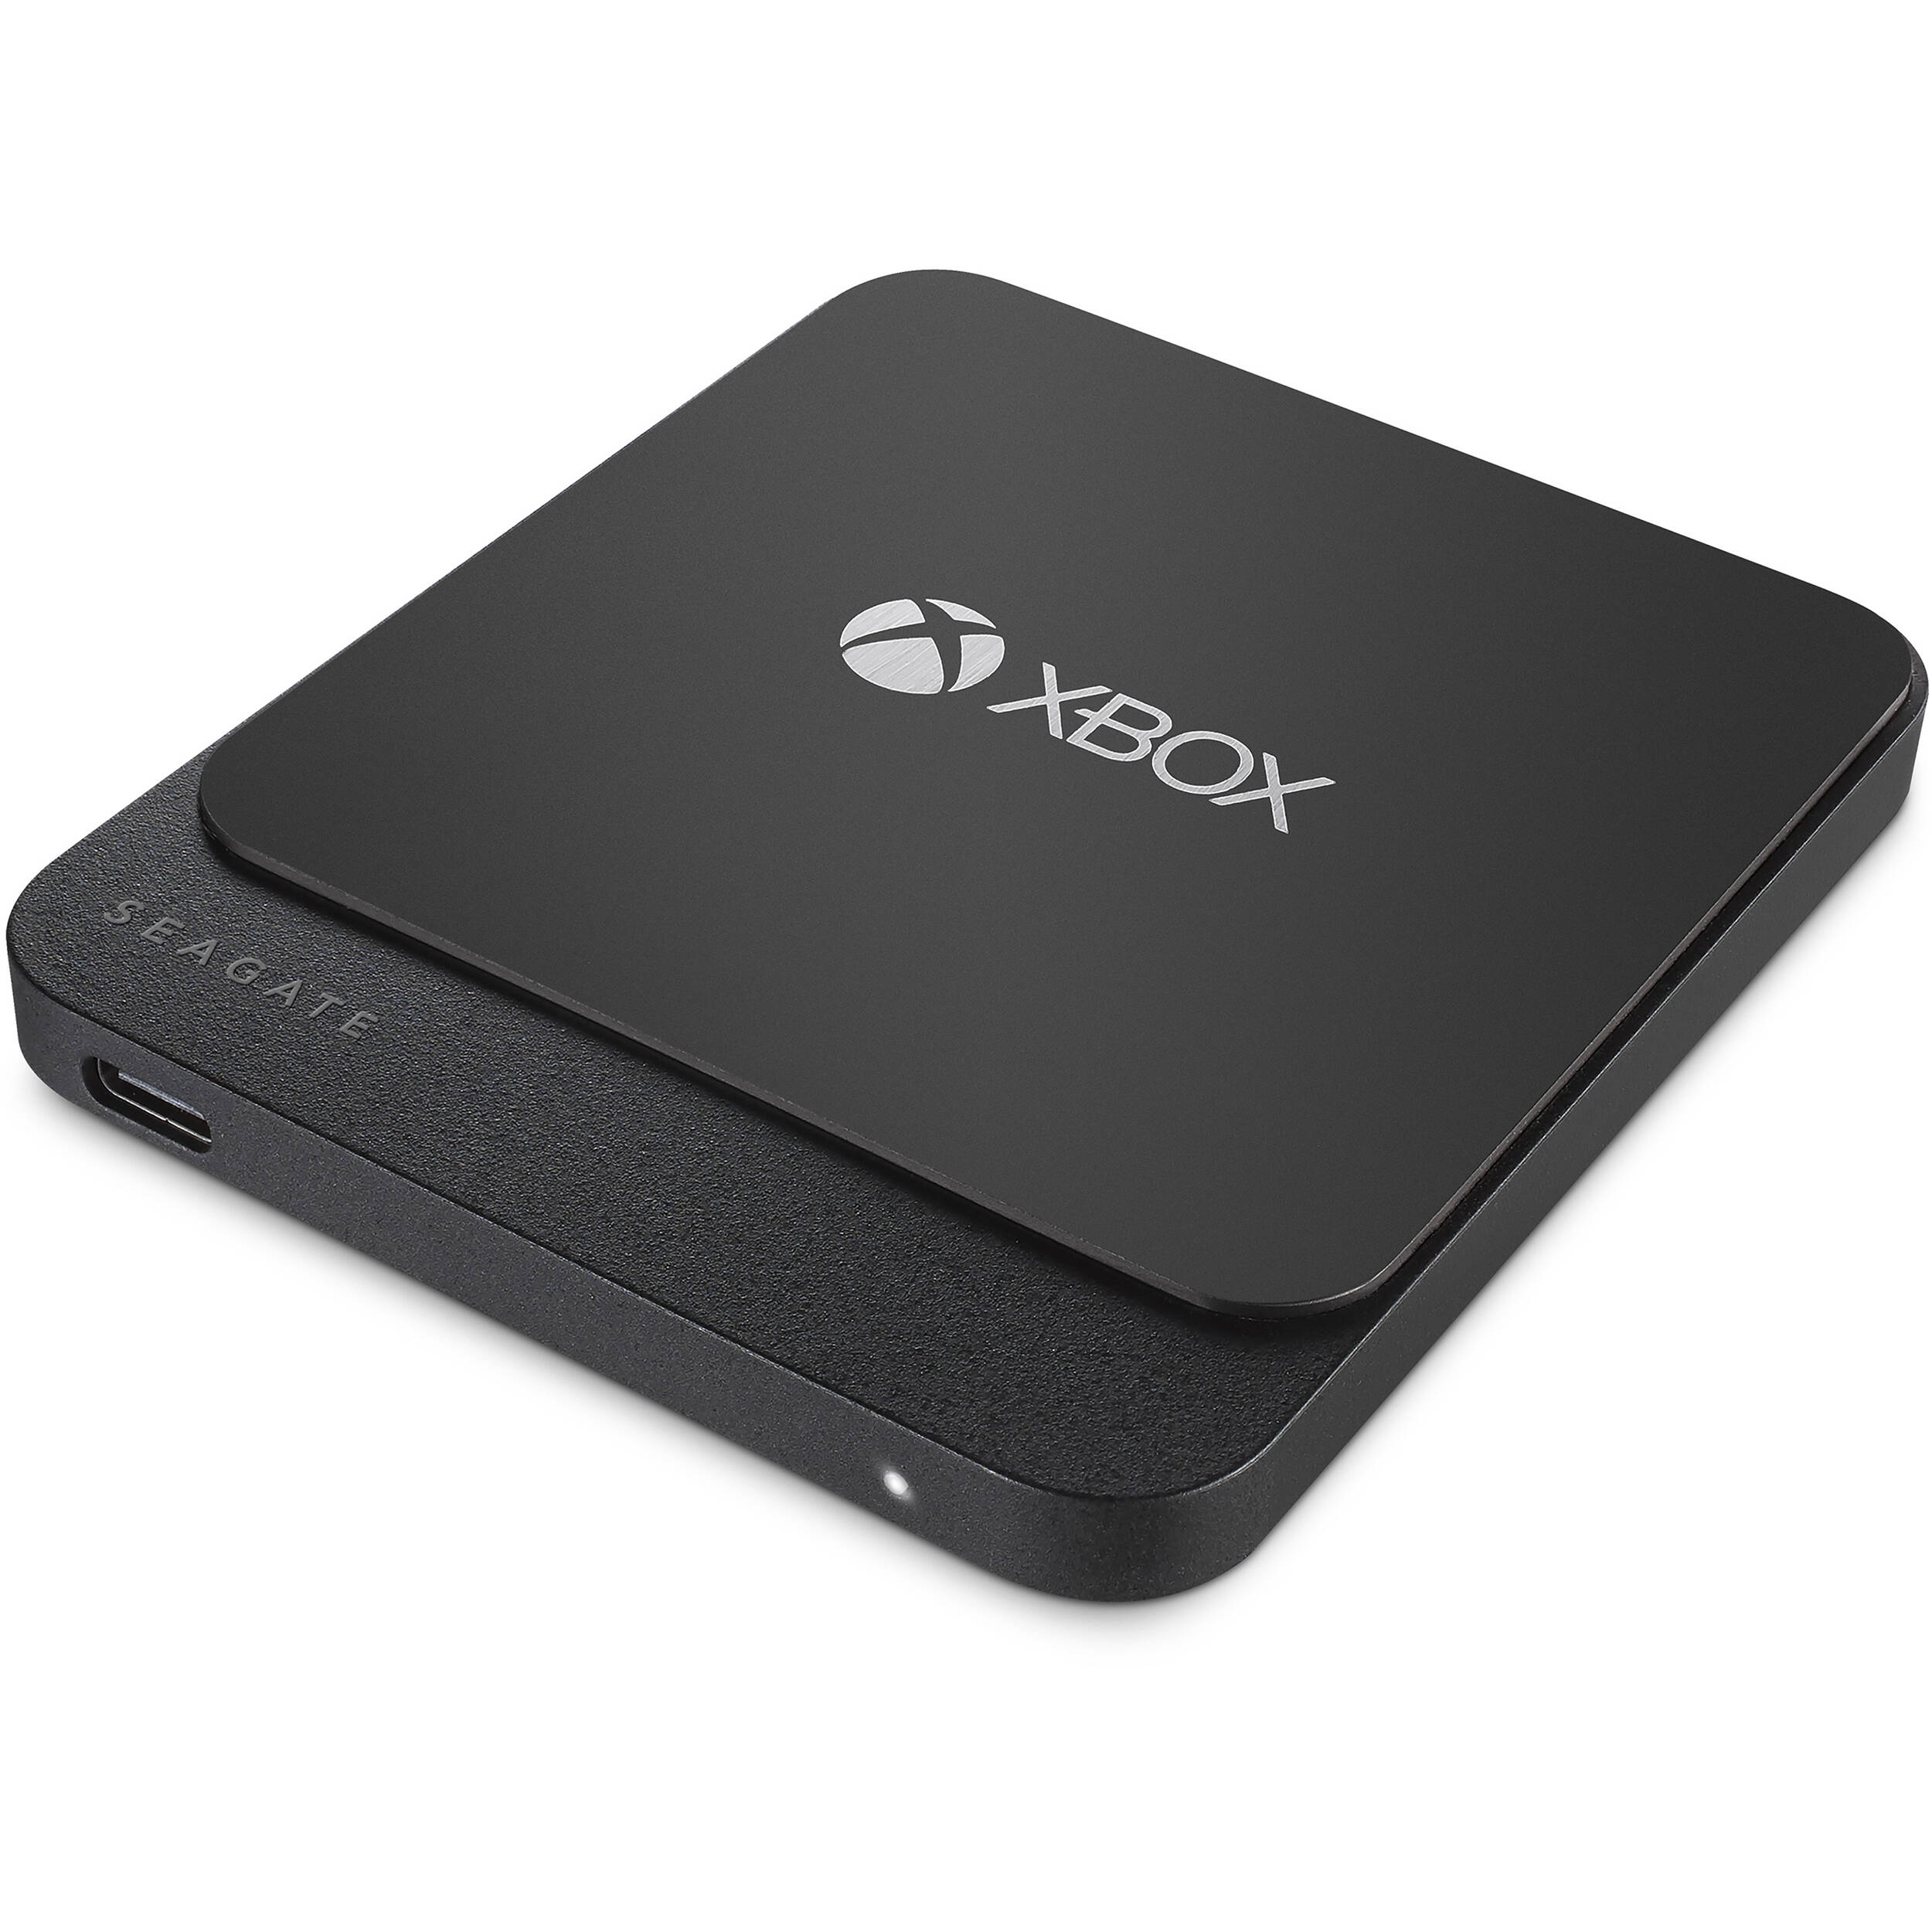 1tb for xbox